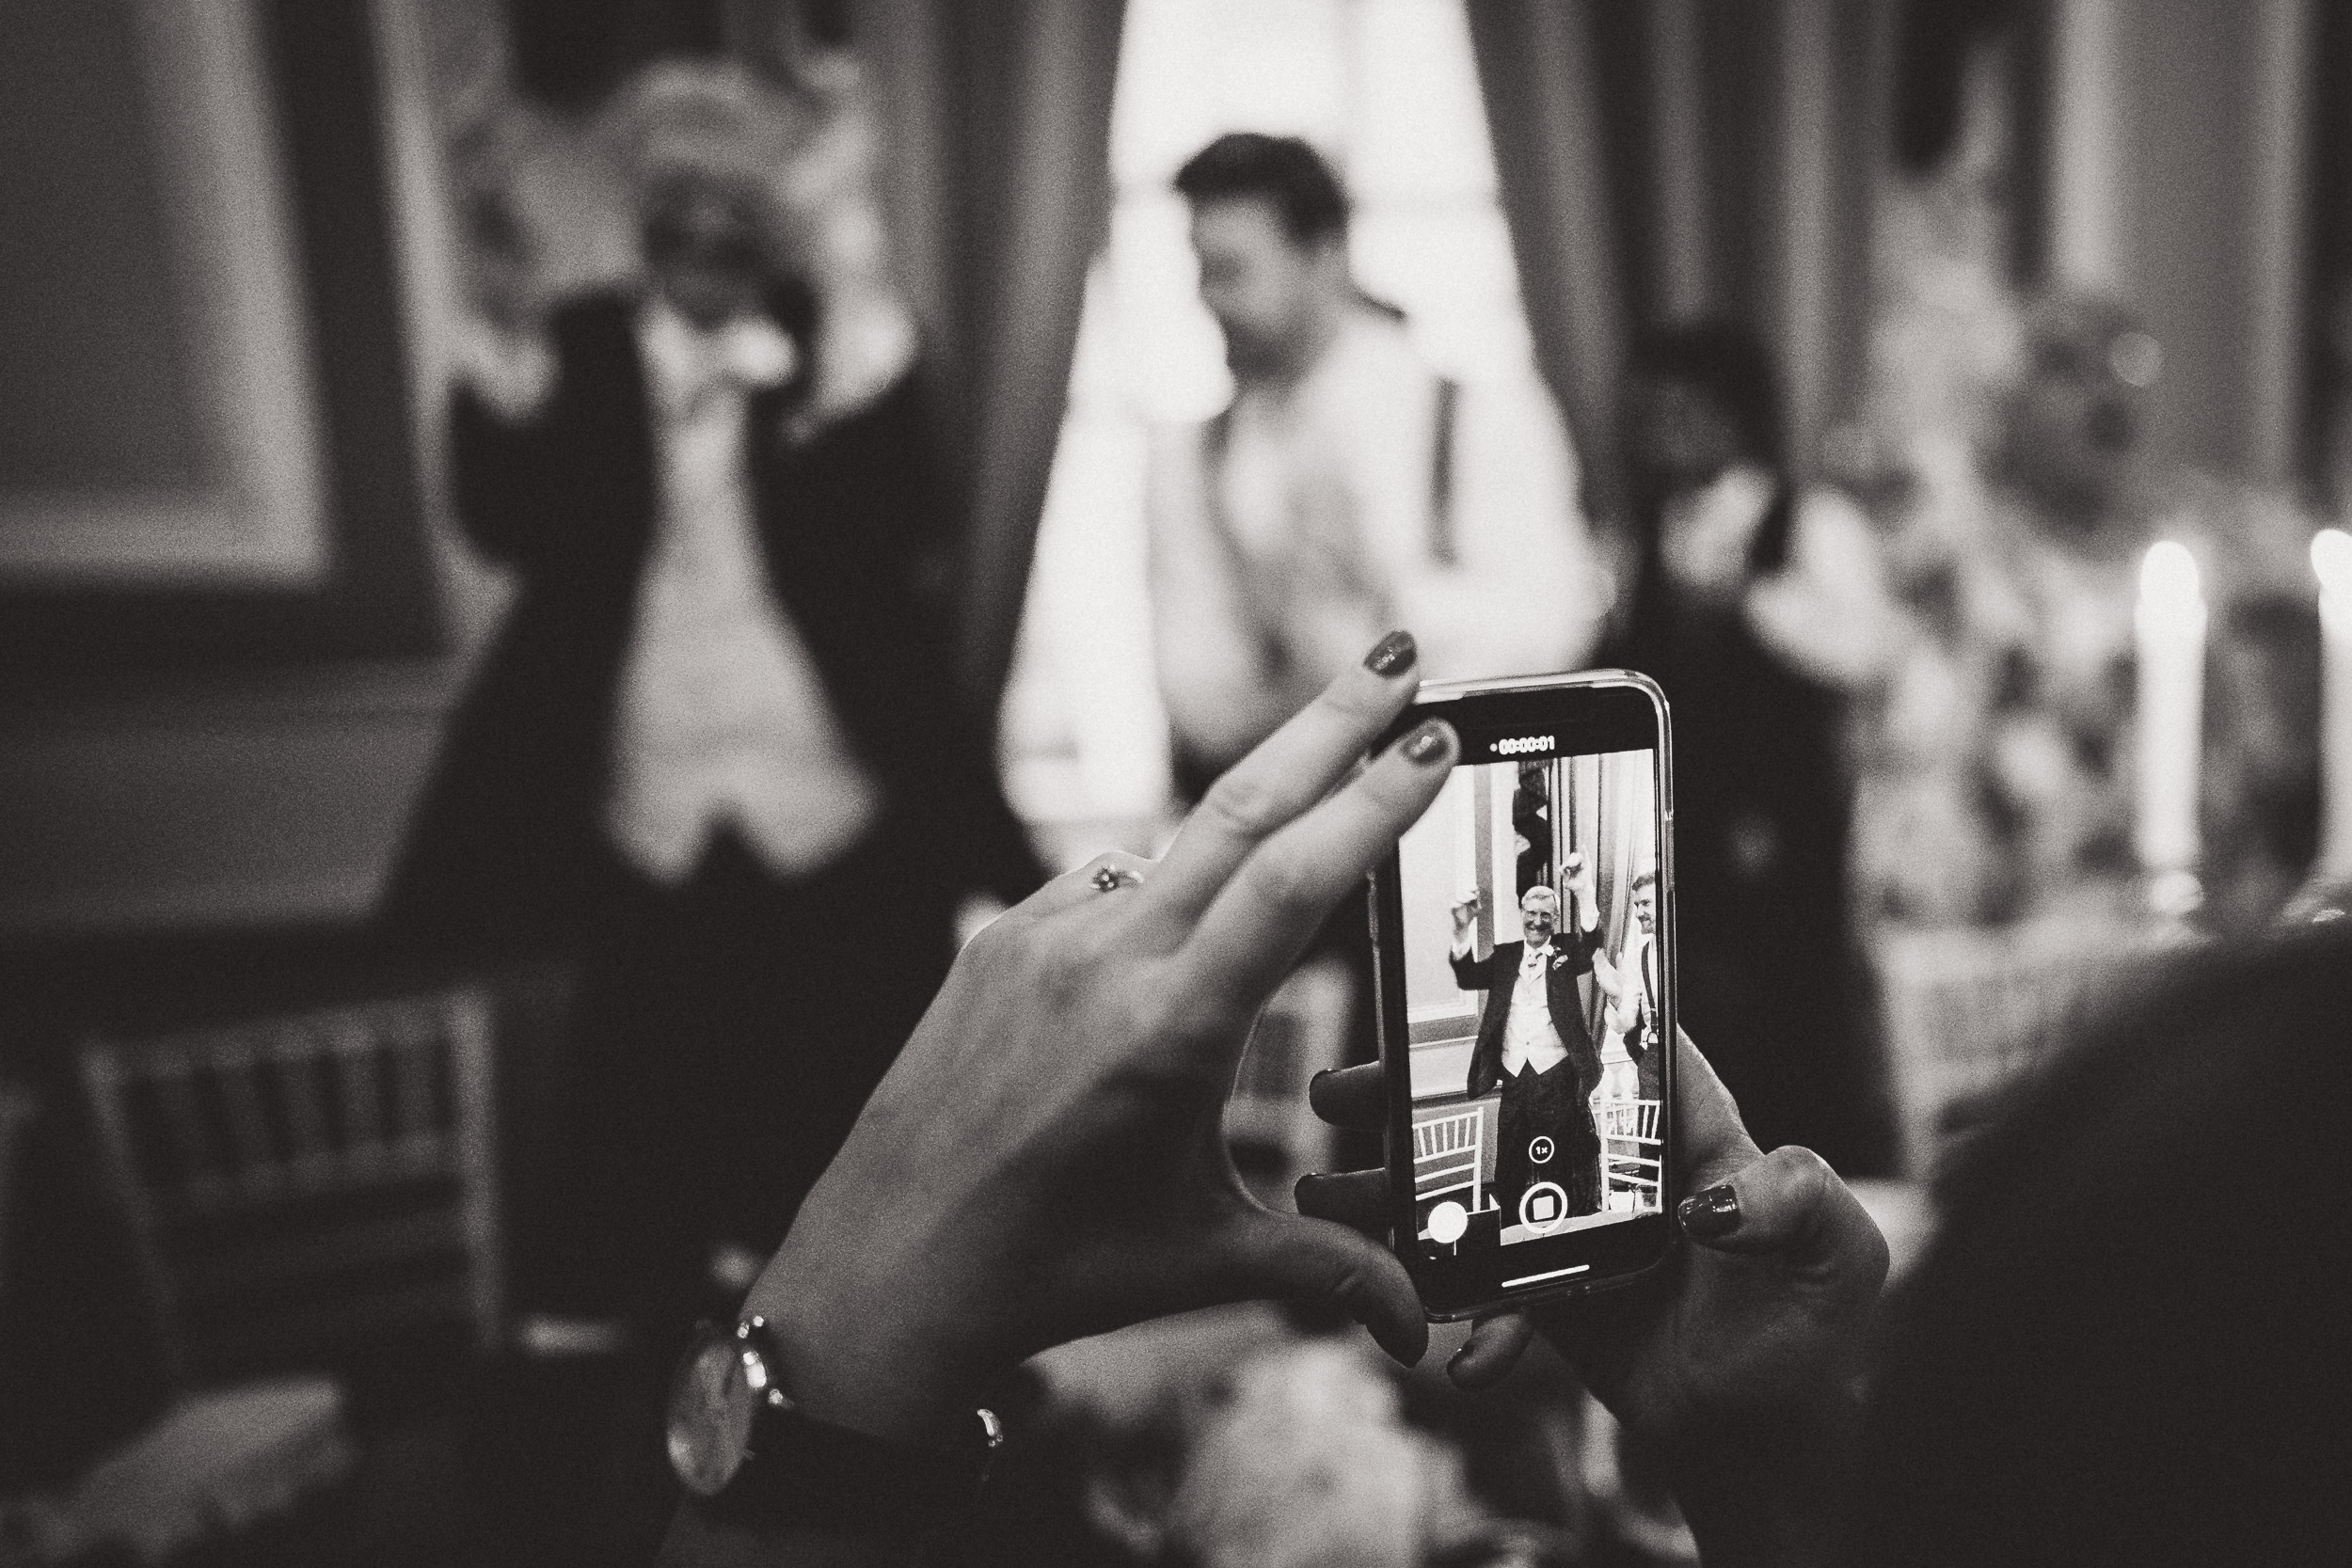 A wedding photographer capturing candid moments of the bride and groom using their cell phone.